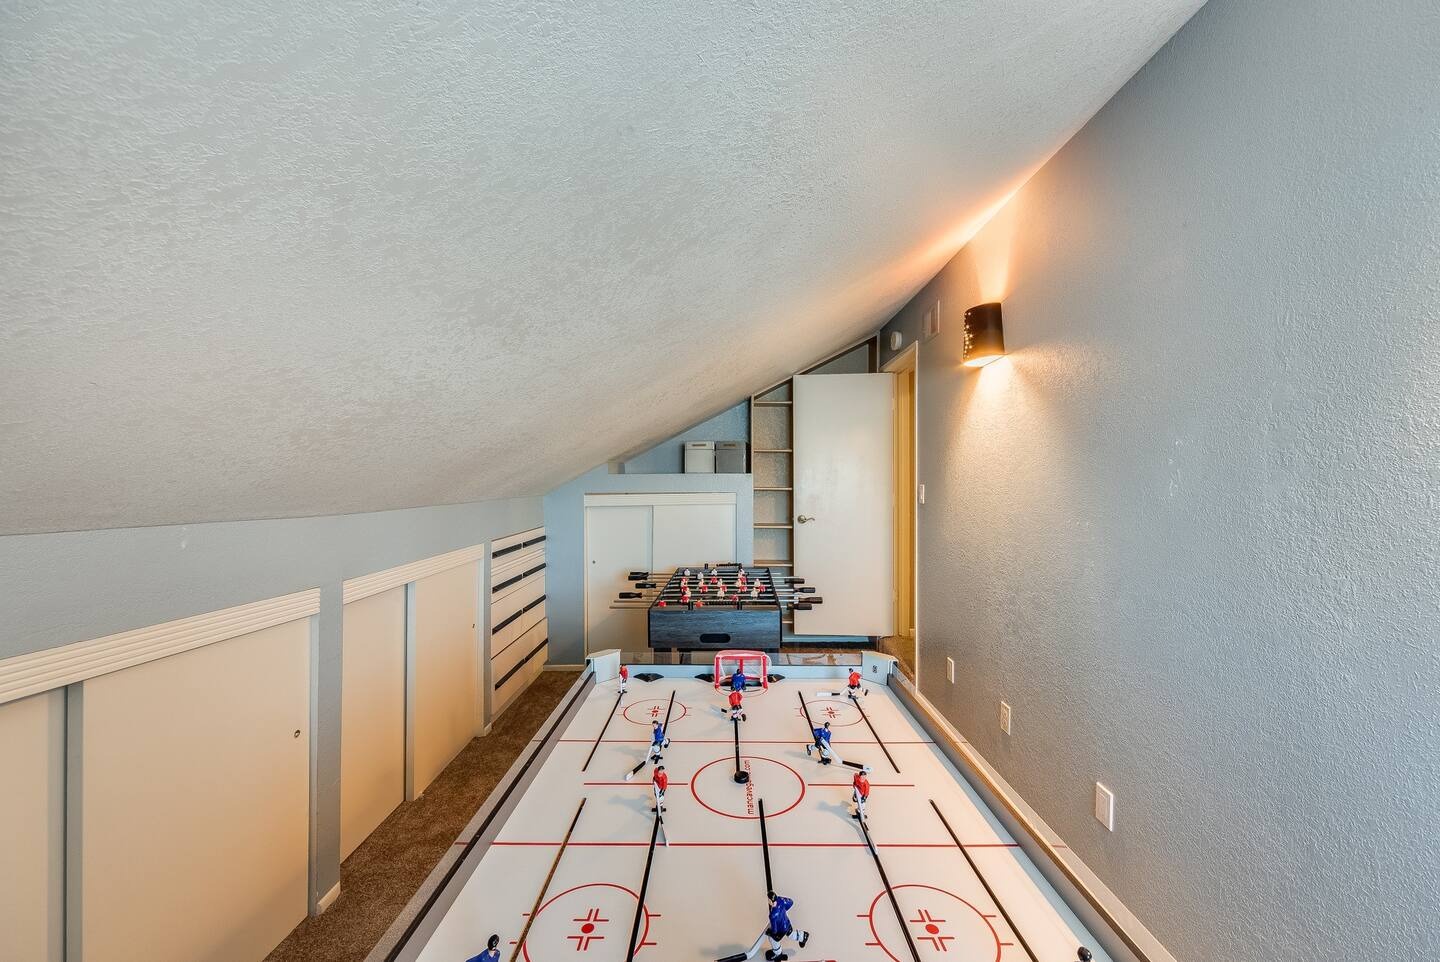 Glendale Vacation Rentals, Cahill Casa - entire game room on the second floor which houses a foosball and air hockey table